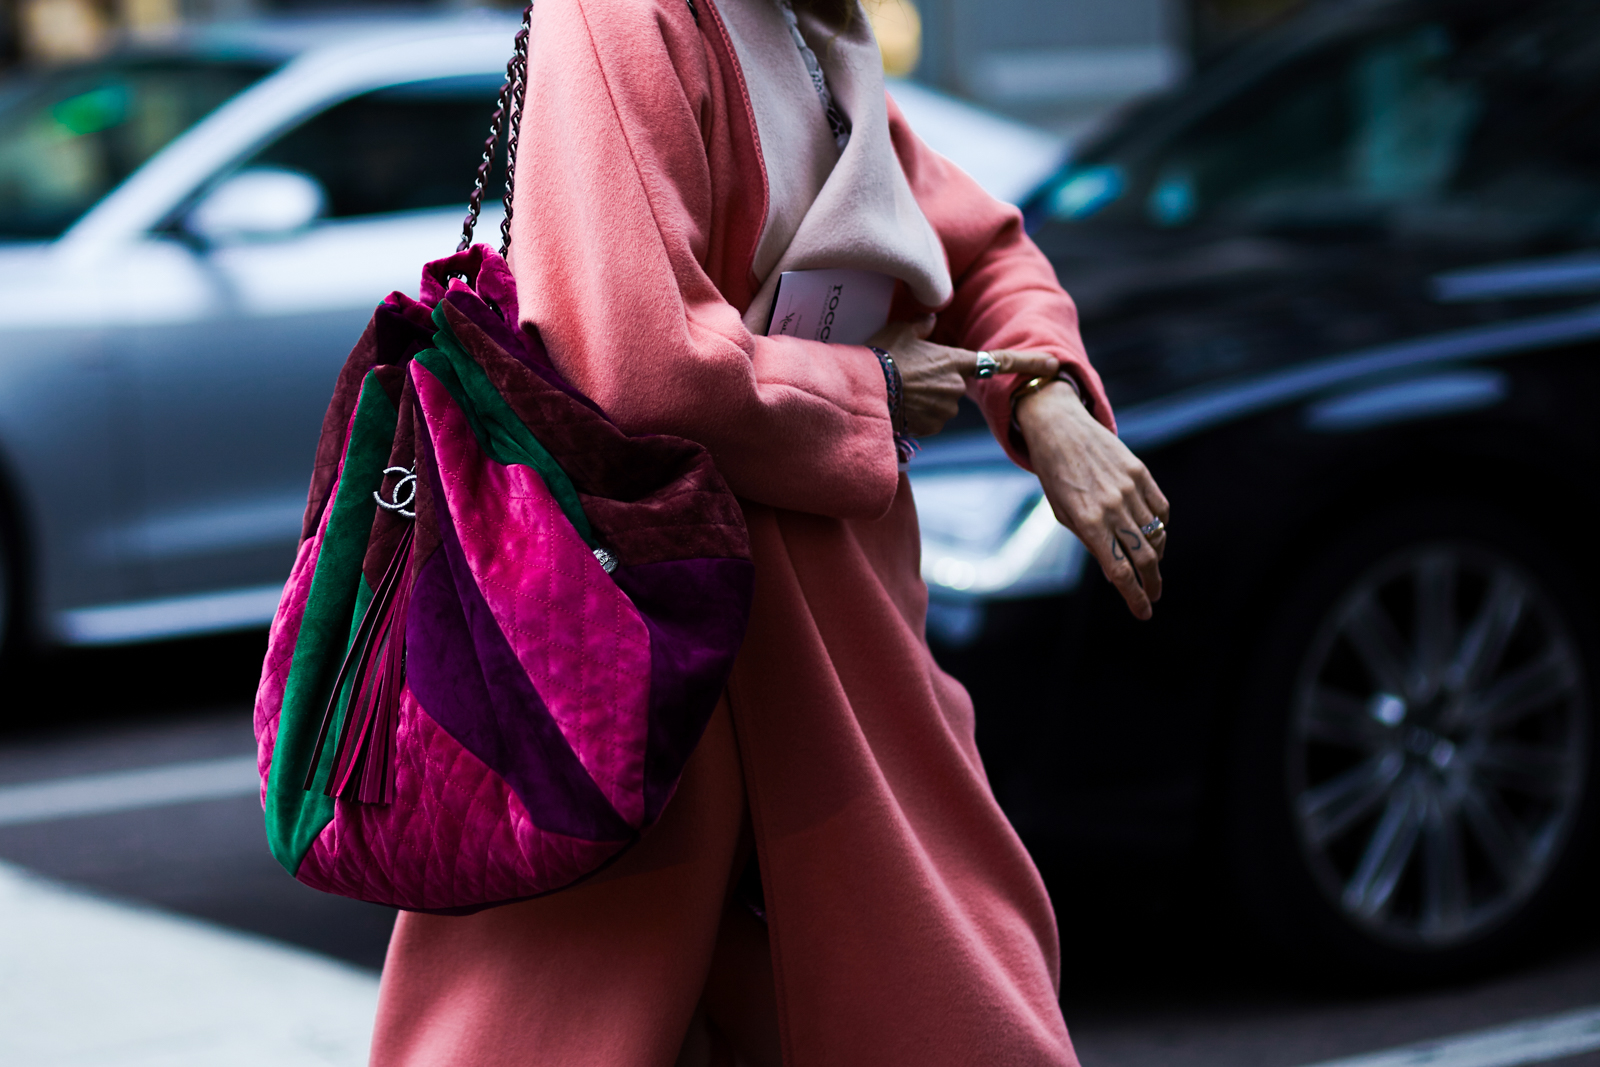 MFW Street Style: A woman wearing a pink coat and a multicolored Chanel bag before the Max Mara Fall 2016 fashion show in Milan, Italy